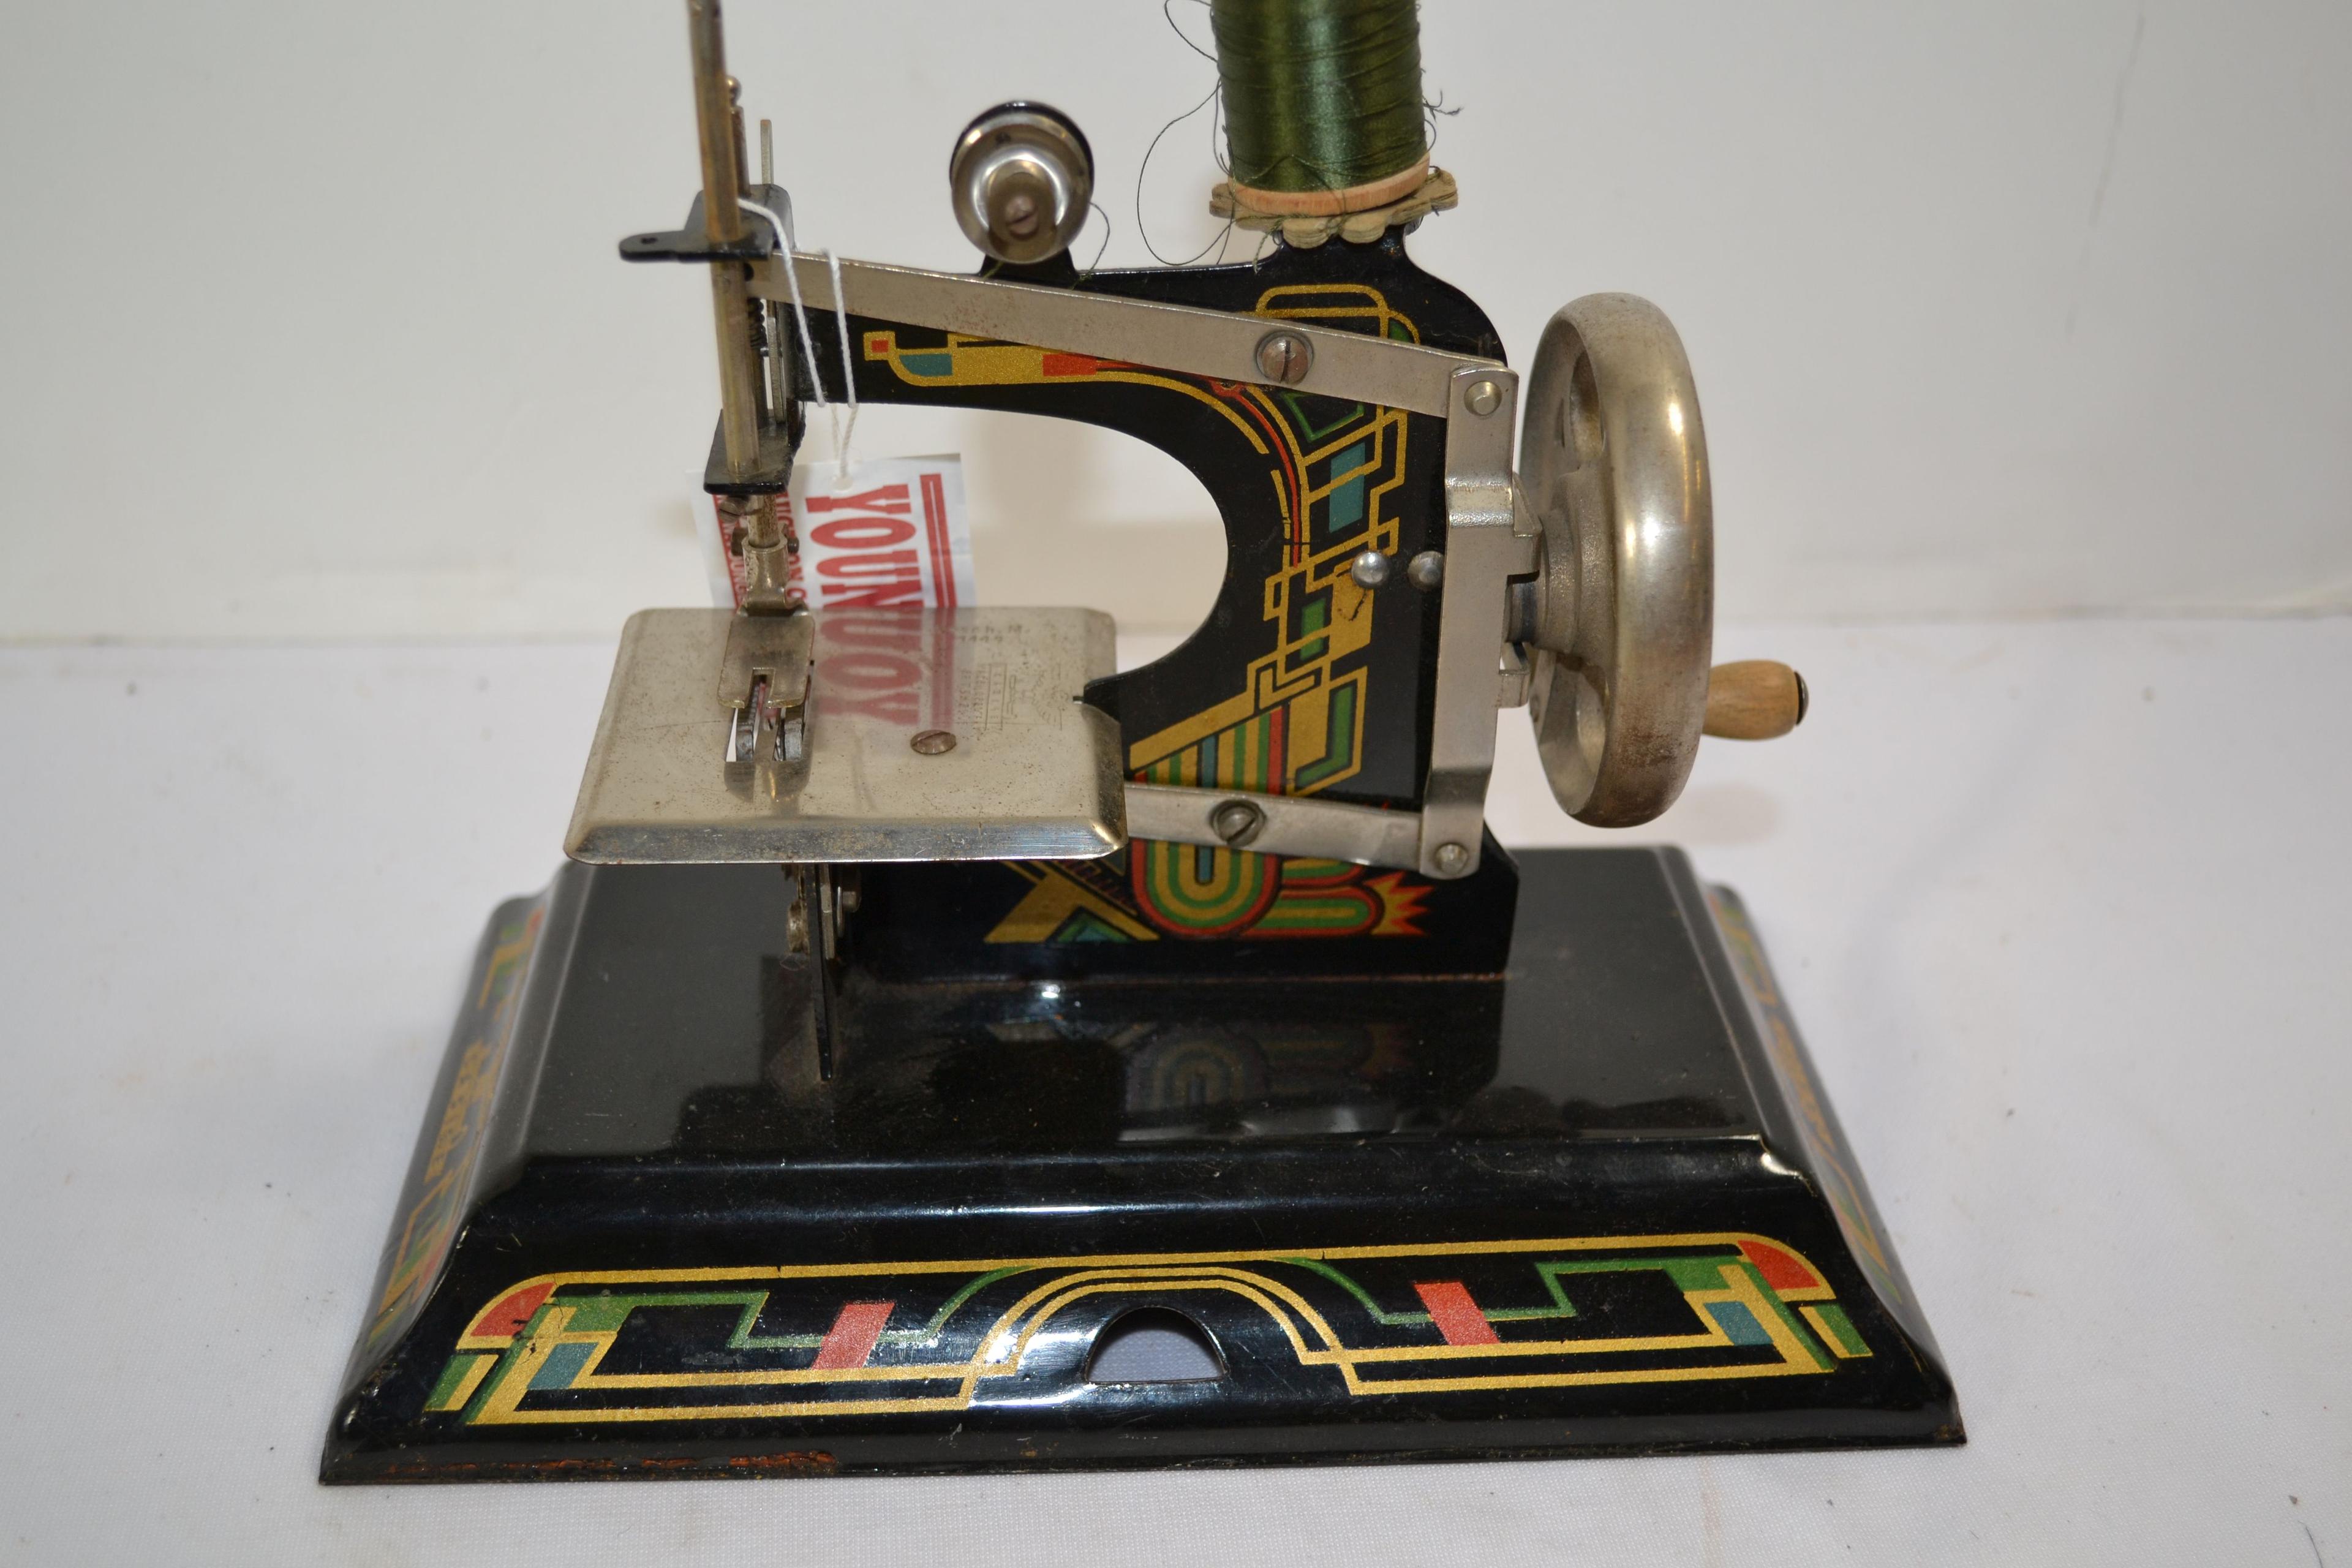 Art Deco Litho Hand Crank Child's Sewing Machine by Casige #116; Made in German